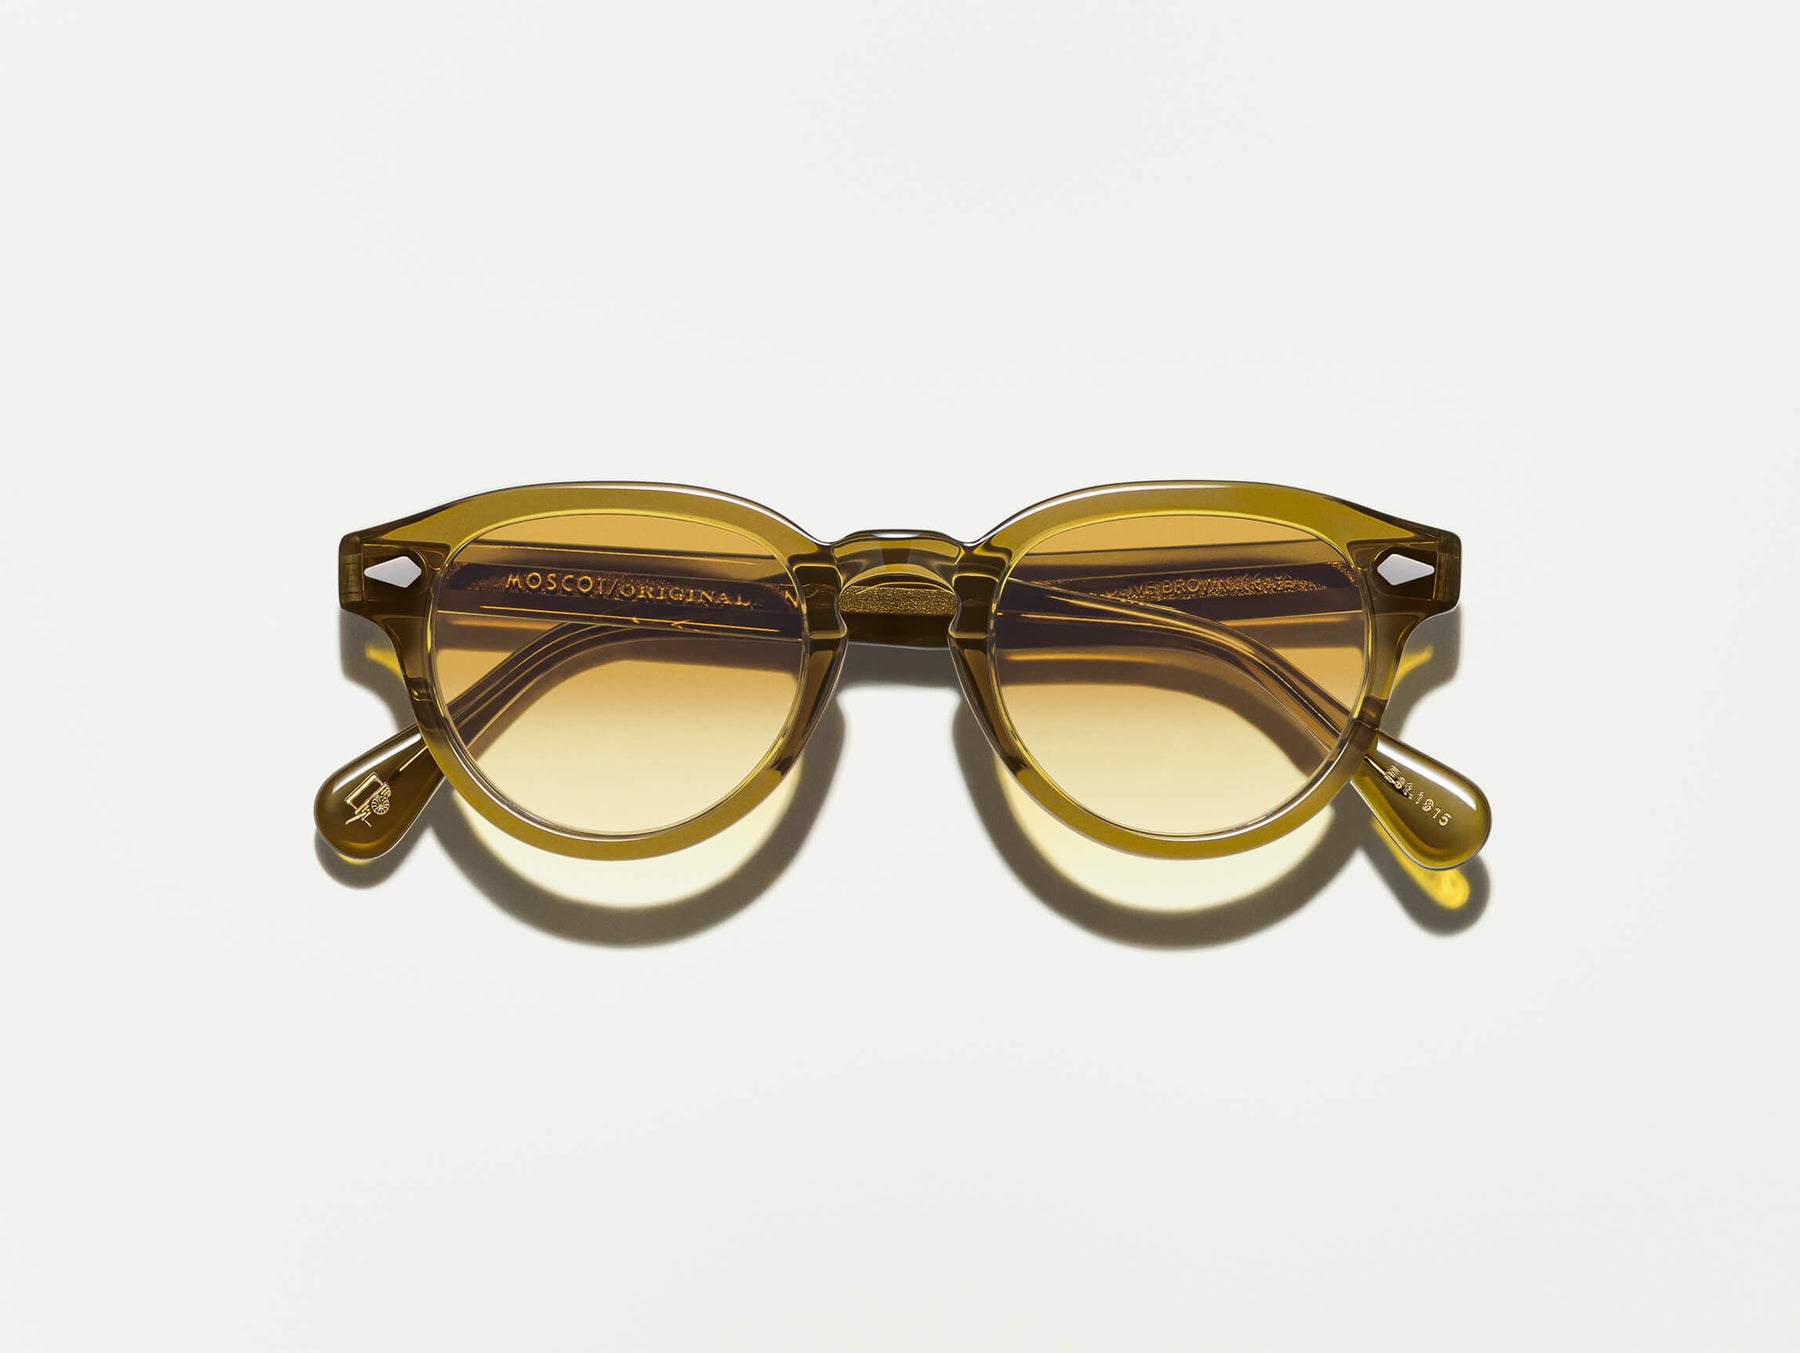 The MAYDELA SUN in Olive Brown with Chestnut Fade Tinted Lenses